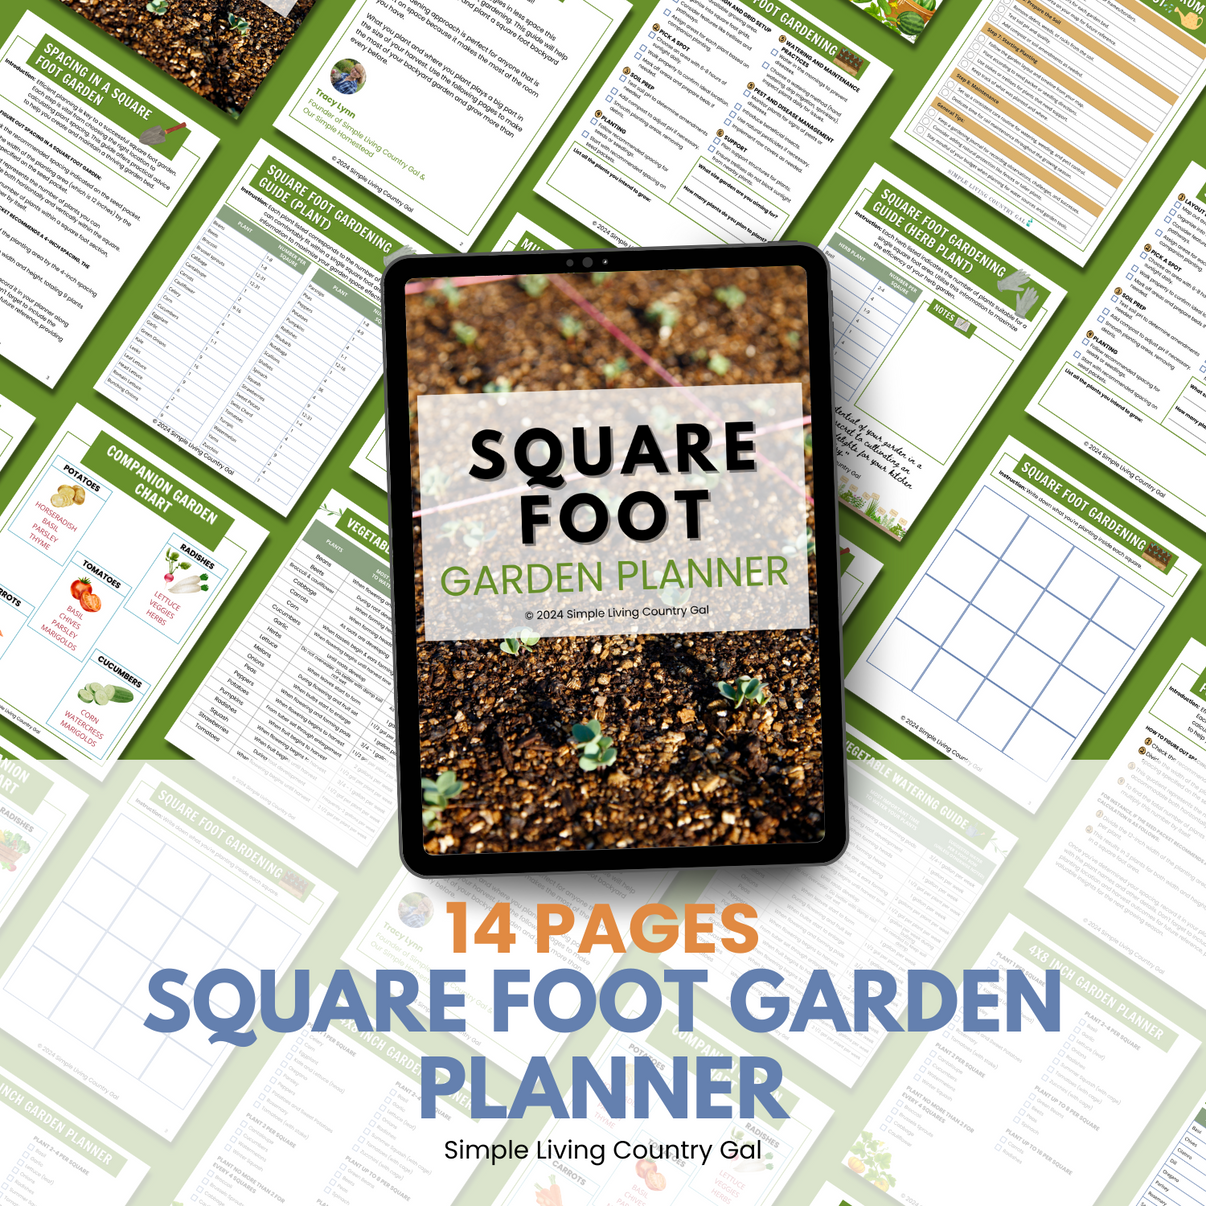 Square Foot Garden Planner+Guide